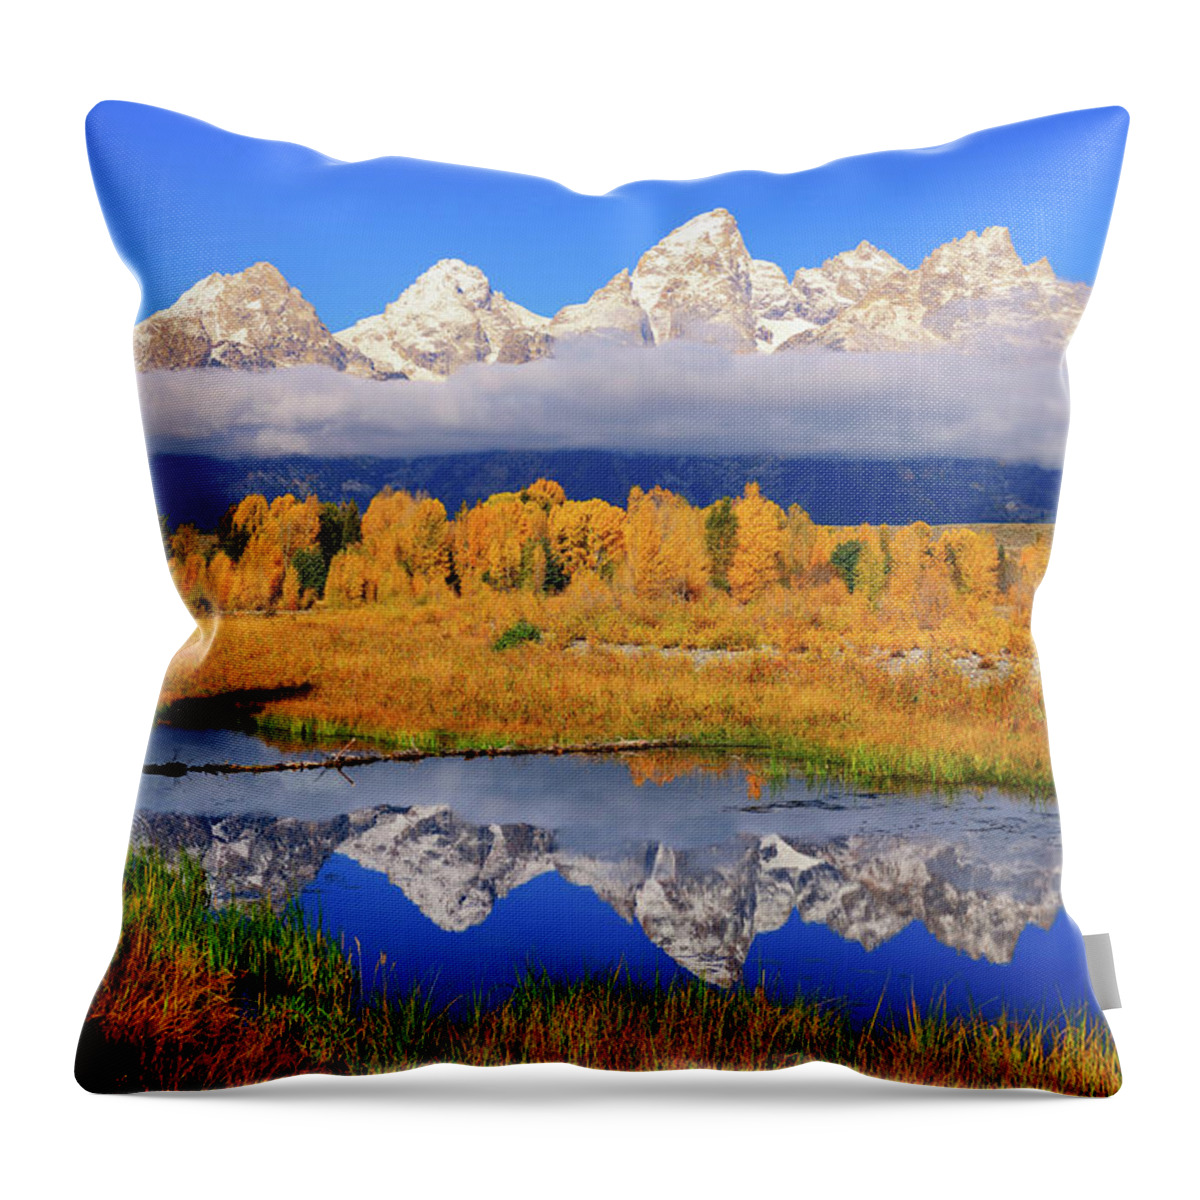 Tetons Throw Pillow featuring the photograph Teton Peaks Reflections by Greg Norrell